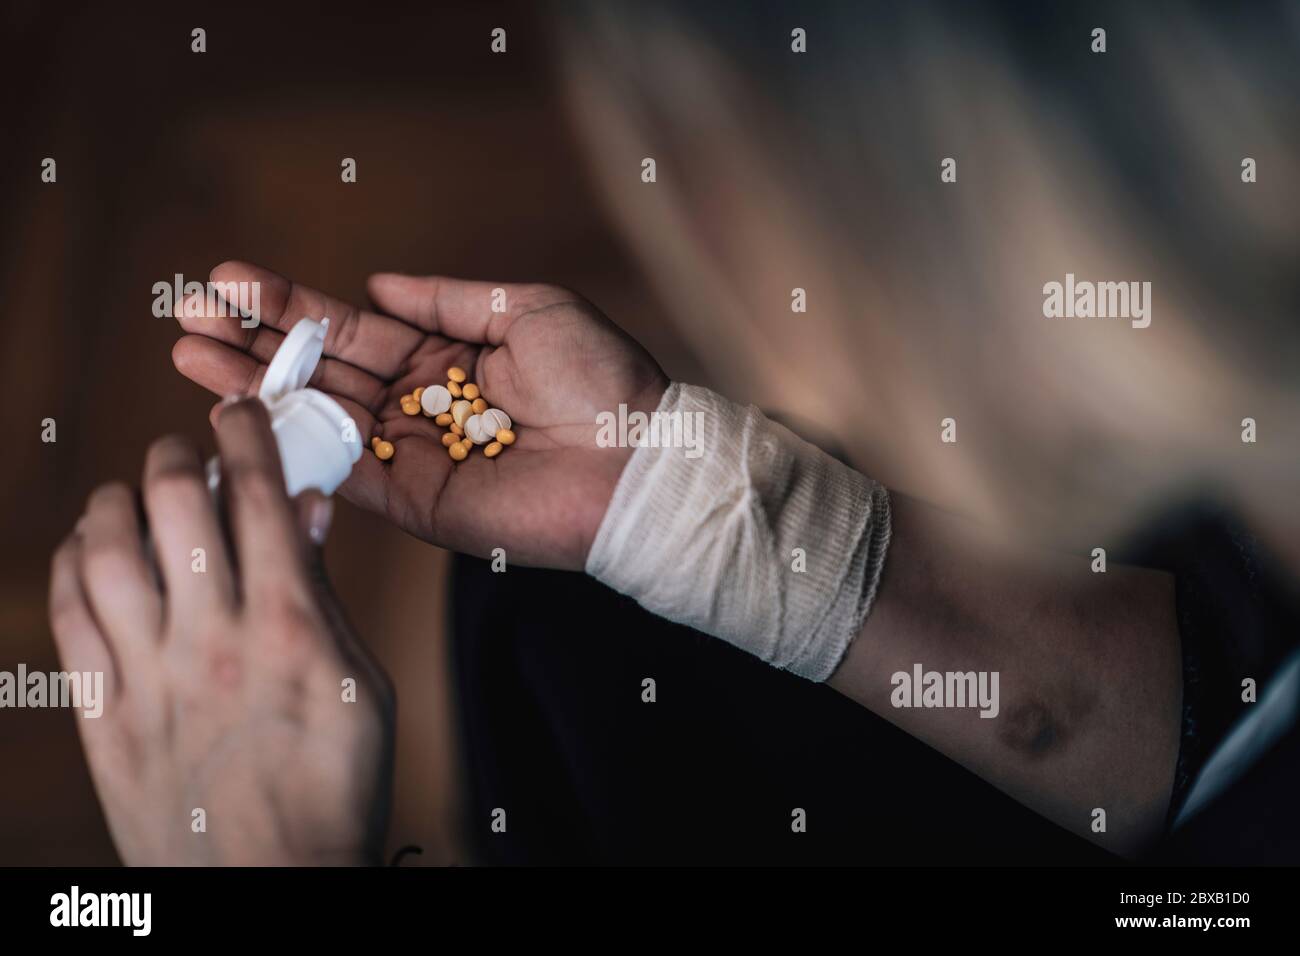 Suicidal mental health patient taking pills Stock Photo